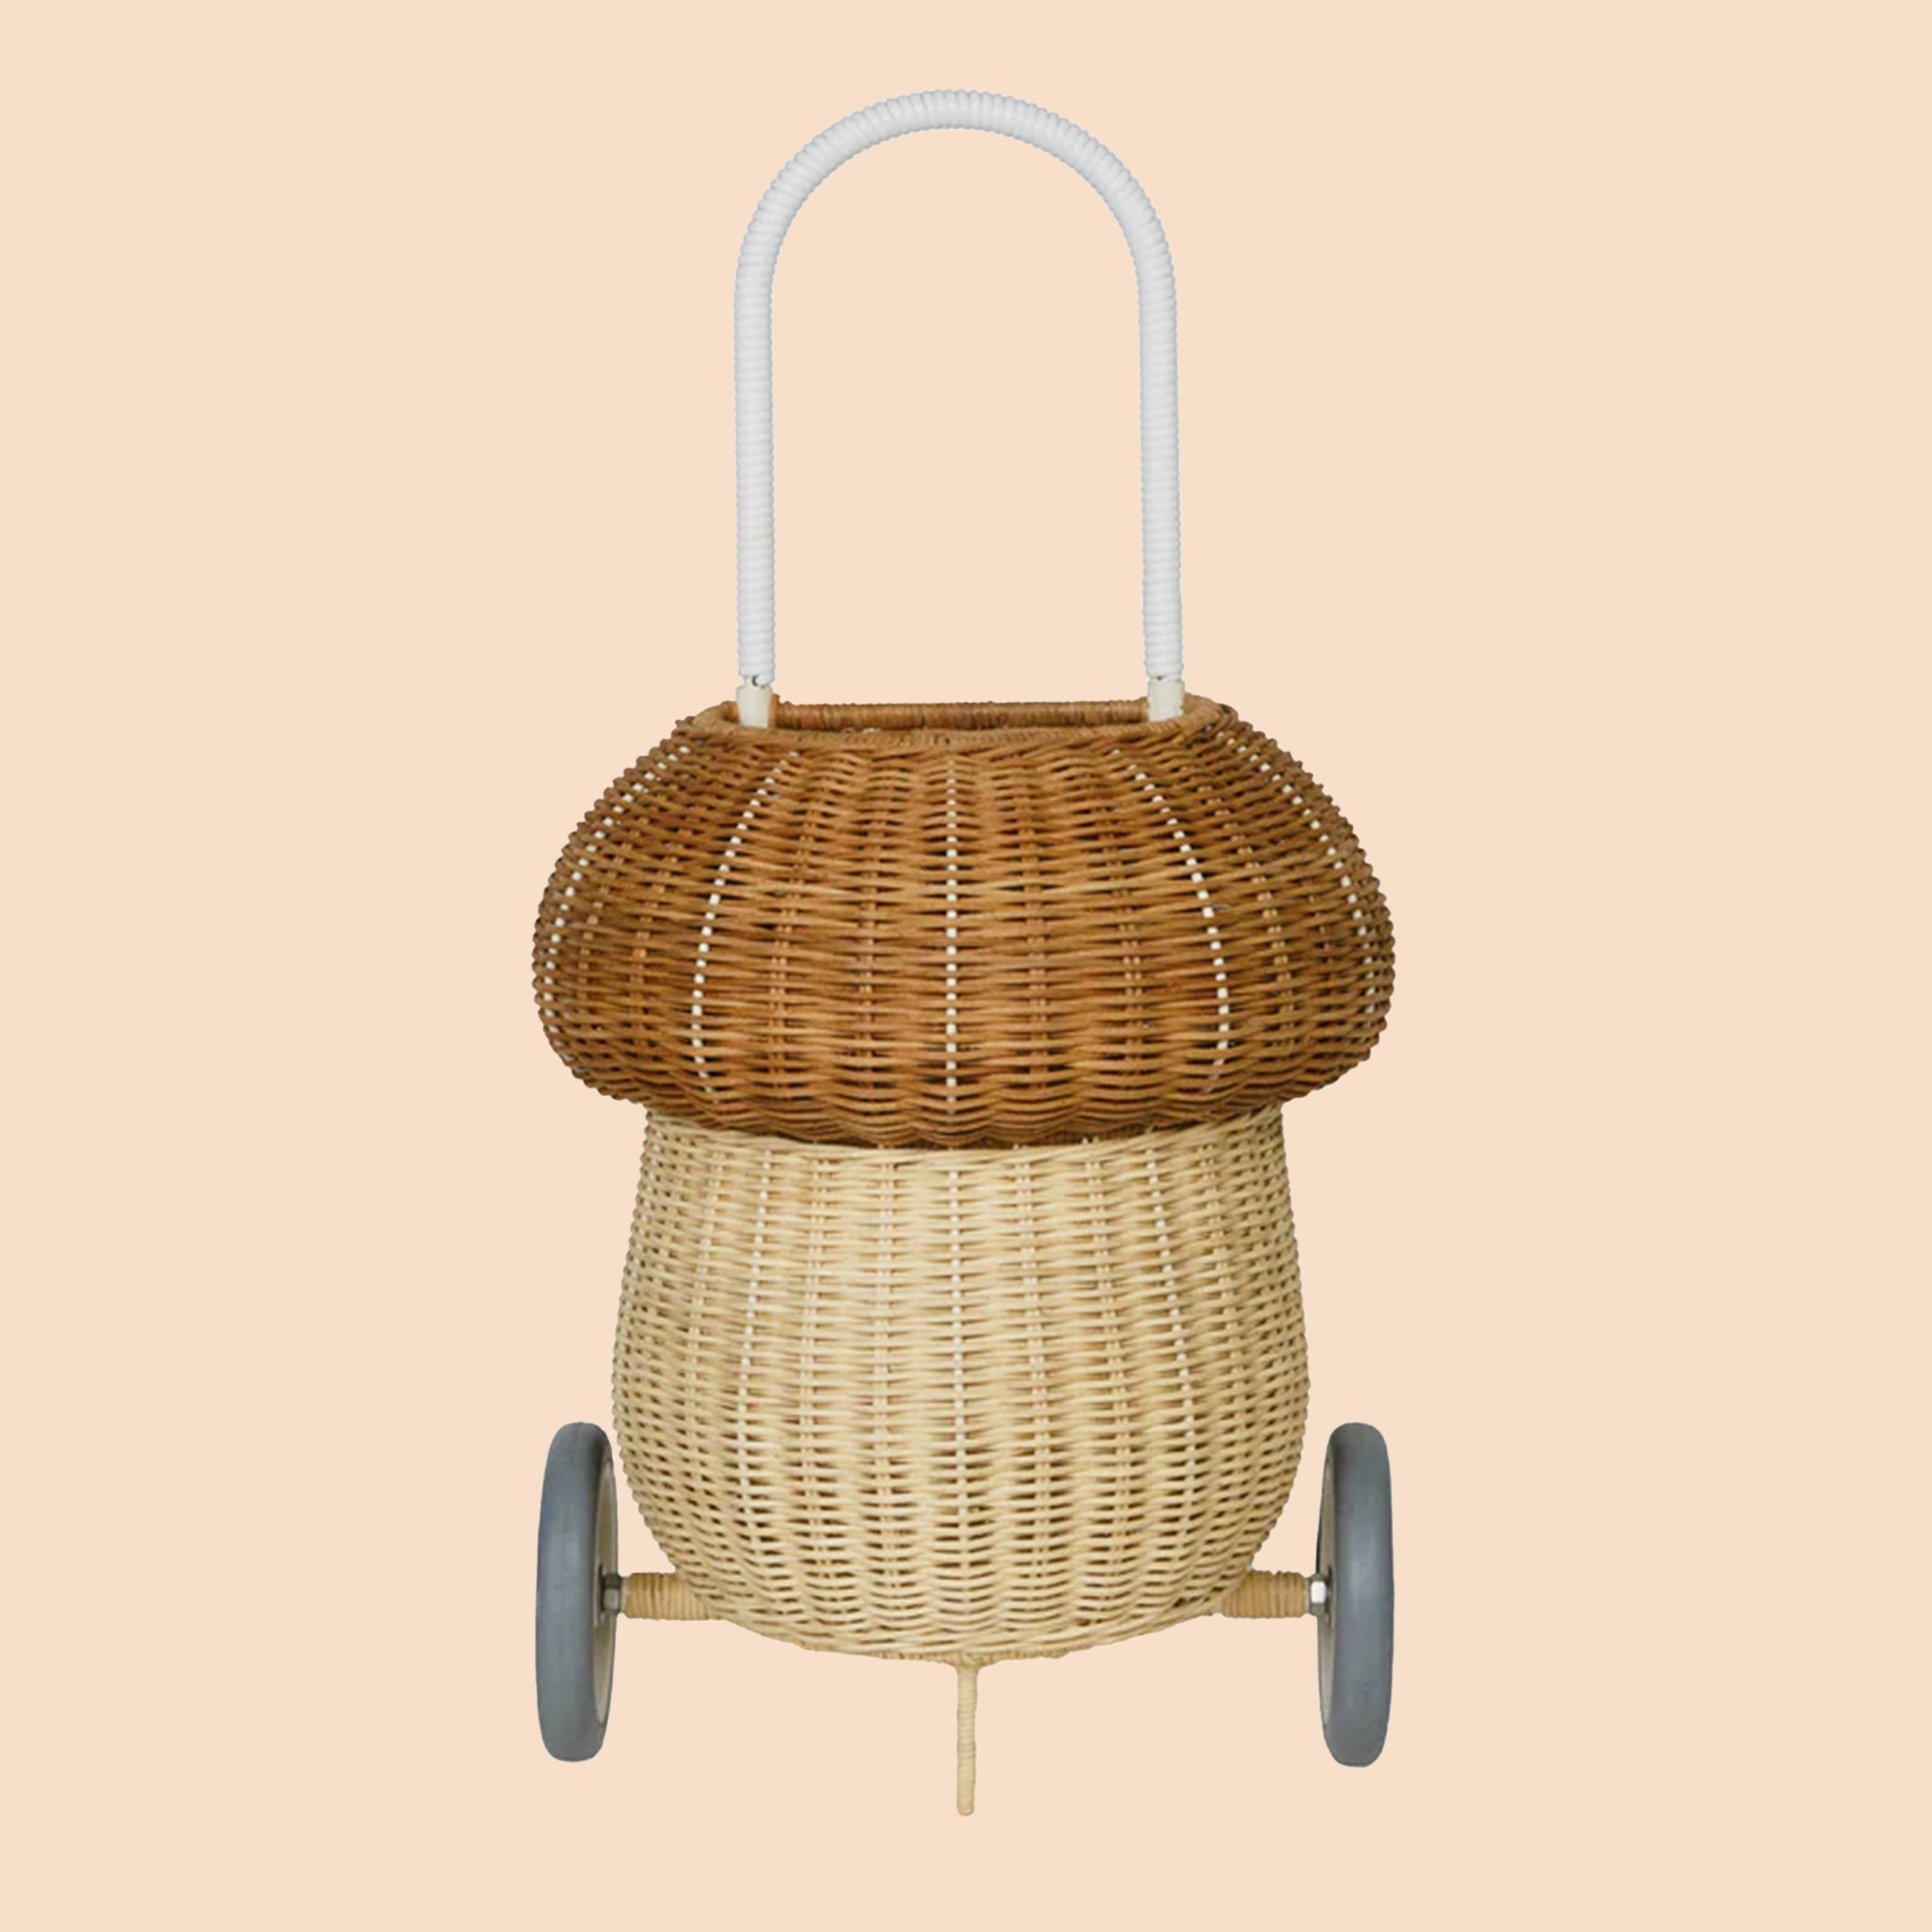 A mushroom shaped rattan basket luggy with a handle for rolling.